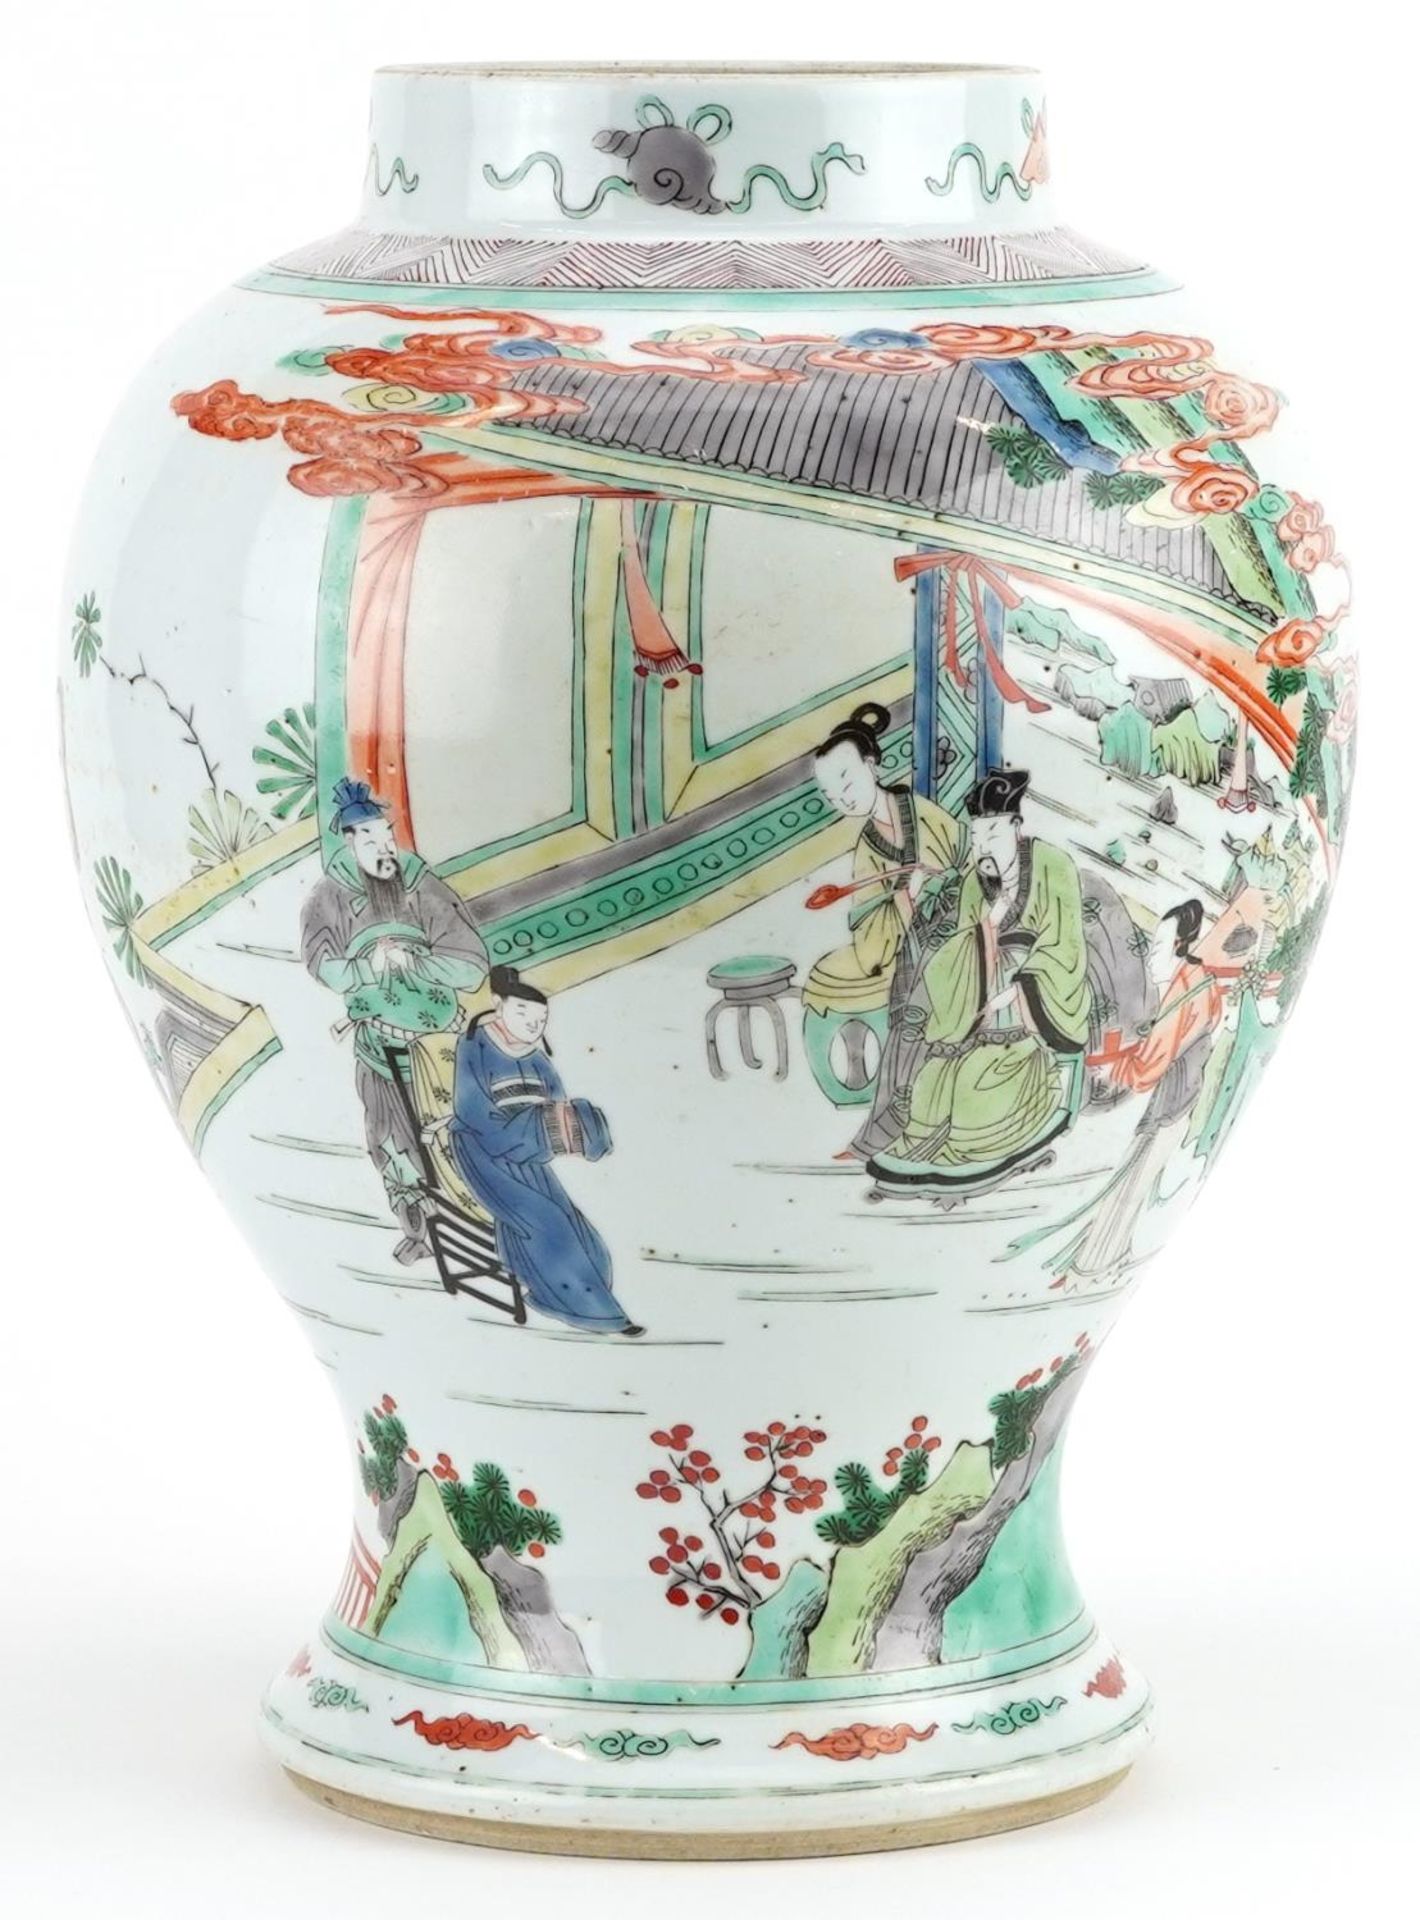 Chinese porcelain baluster vase hand painted in the famille verte palette with emperors and